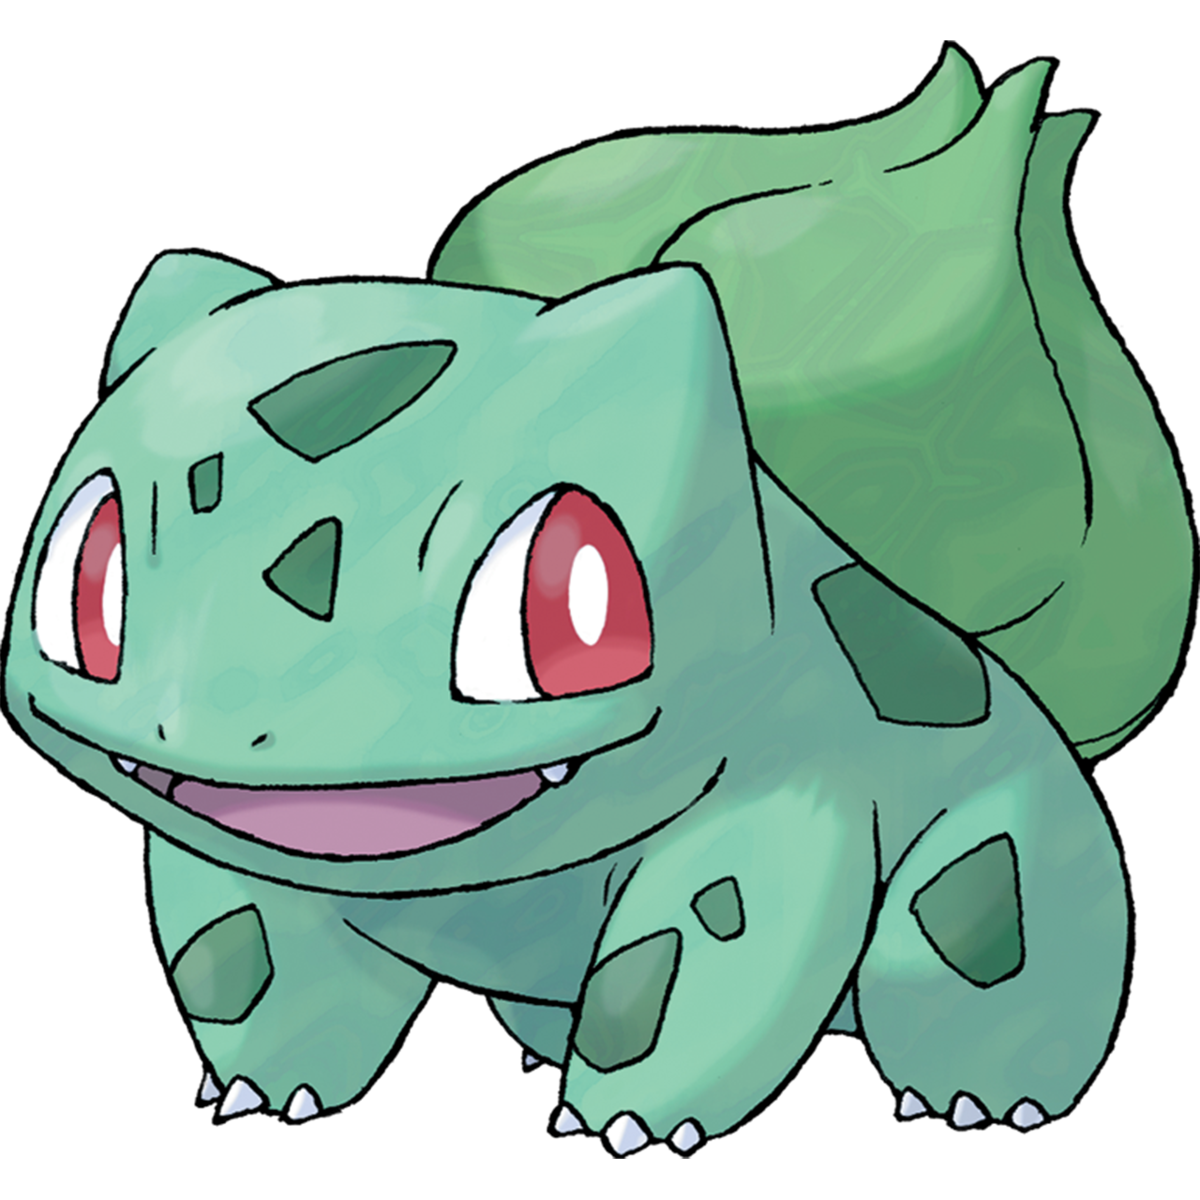 facet Betydning Stratford på Avon Willie Muse on Twitter: "Bulbasaur is the best Pokémon: *blood red eyes  *vampire fangs *useless ears without any holes in them *decorative  melanomas *ass onion https://t.co/WZIUFe7JJ0" / Twitter